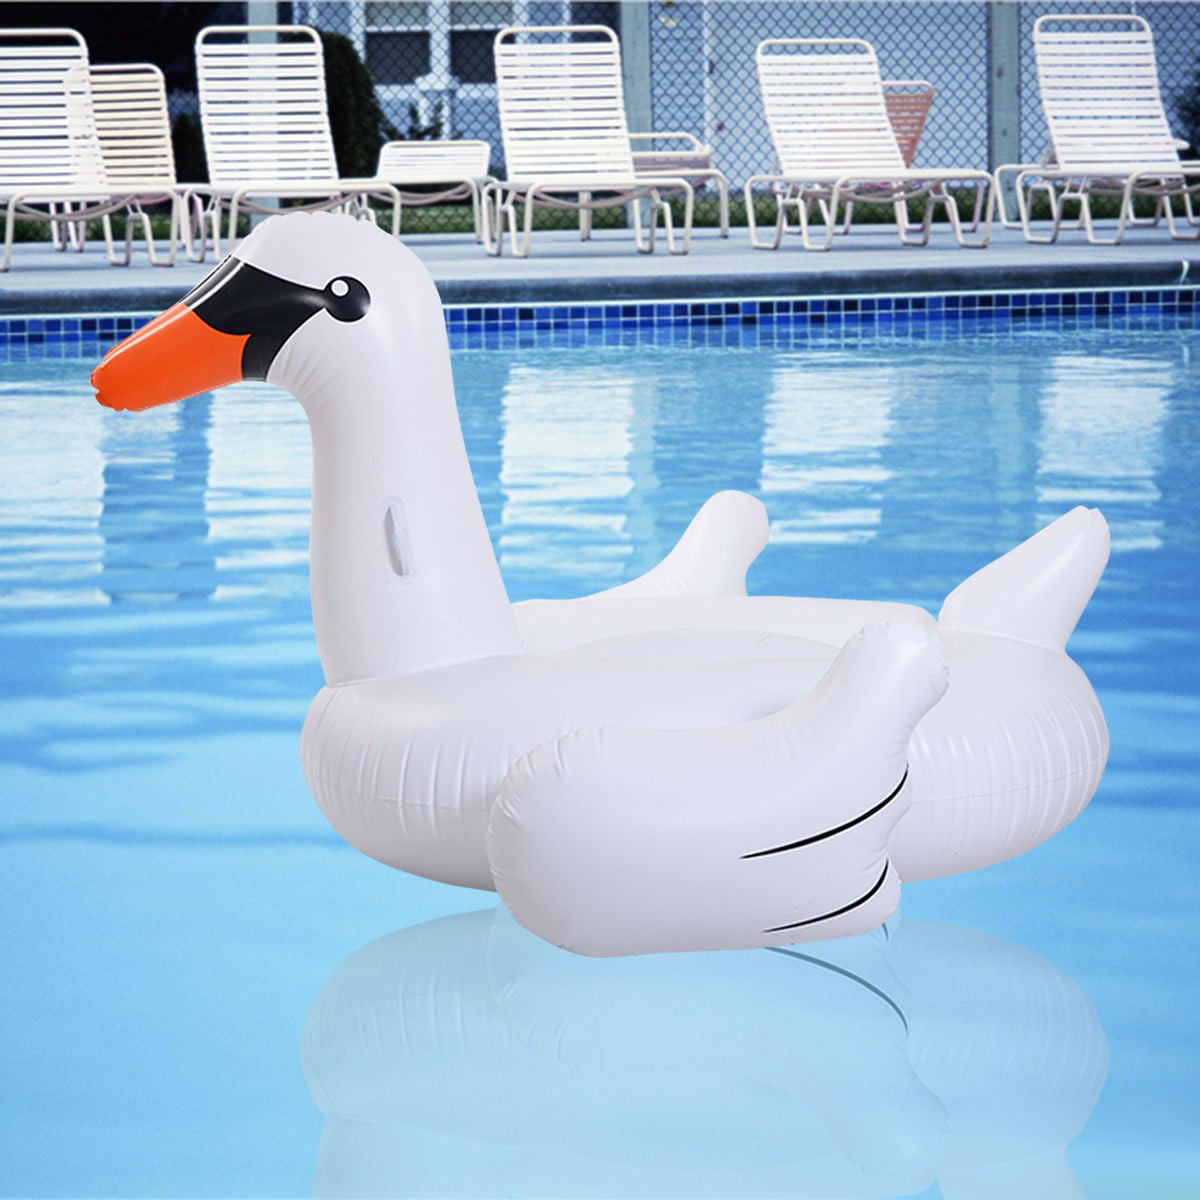 75" Inflatable Leisure Giant Swan Float Toy Rideable Raft Swimming Pool Floats 